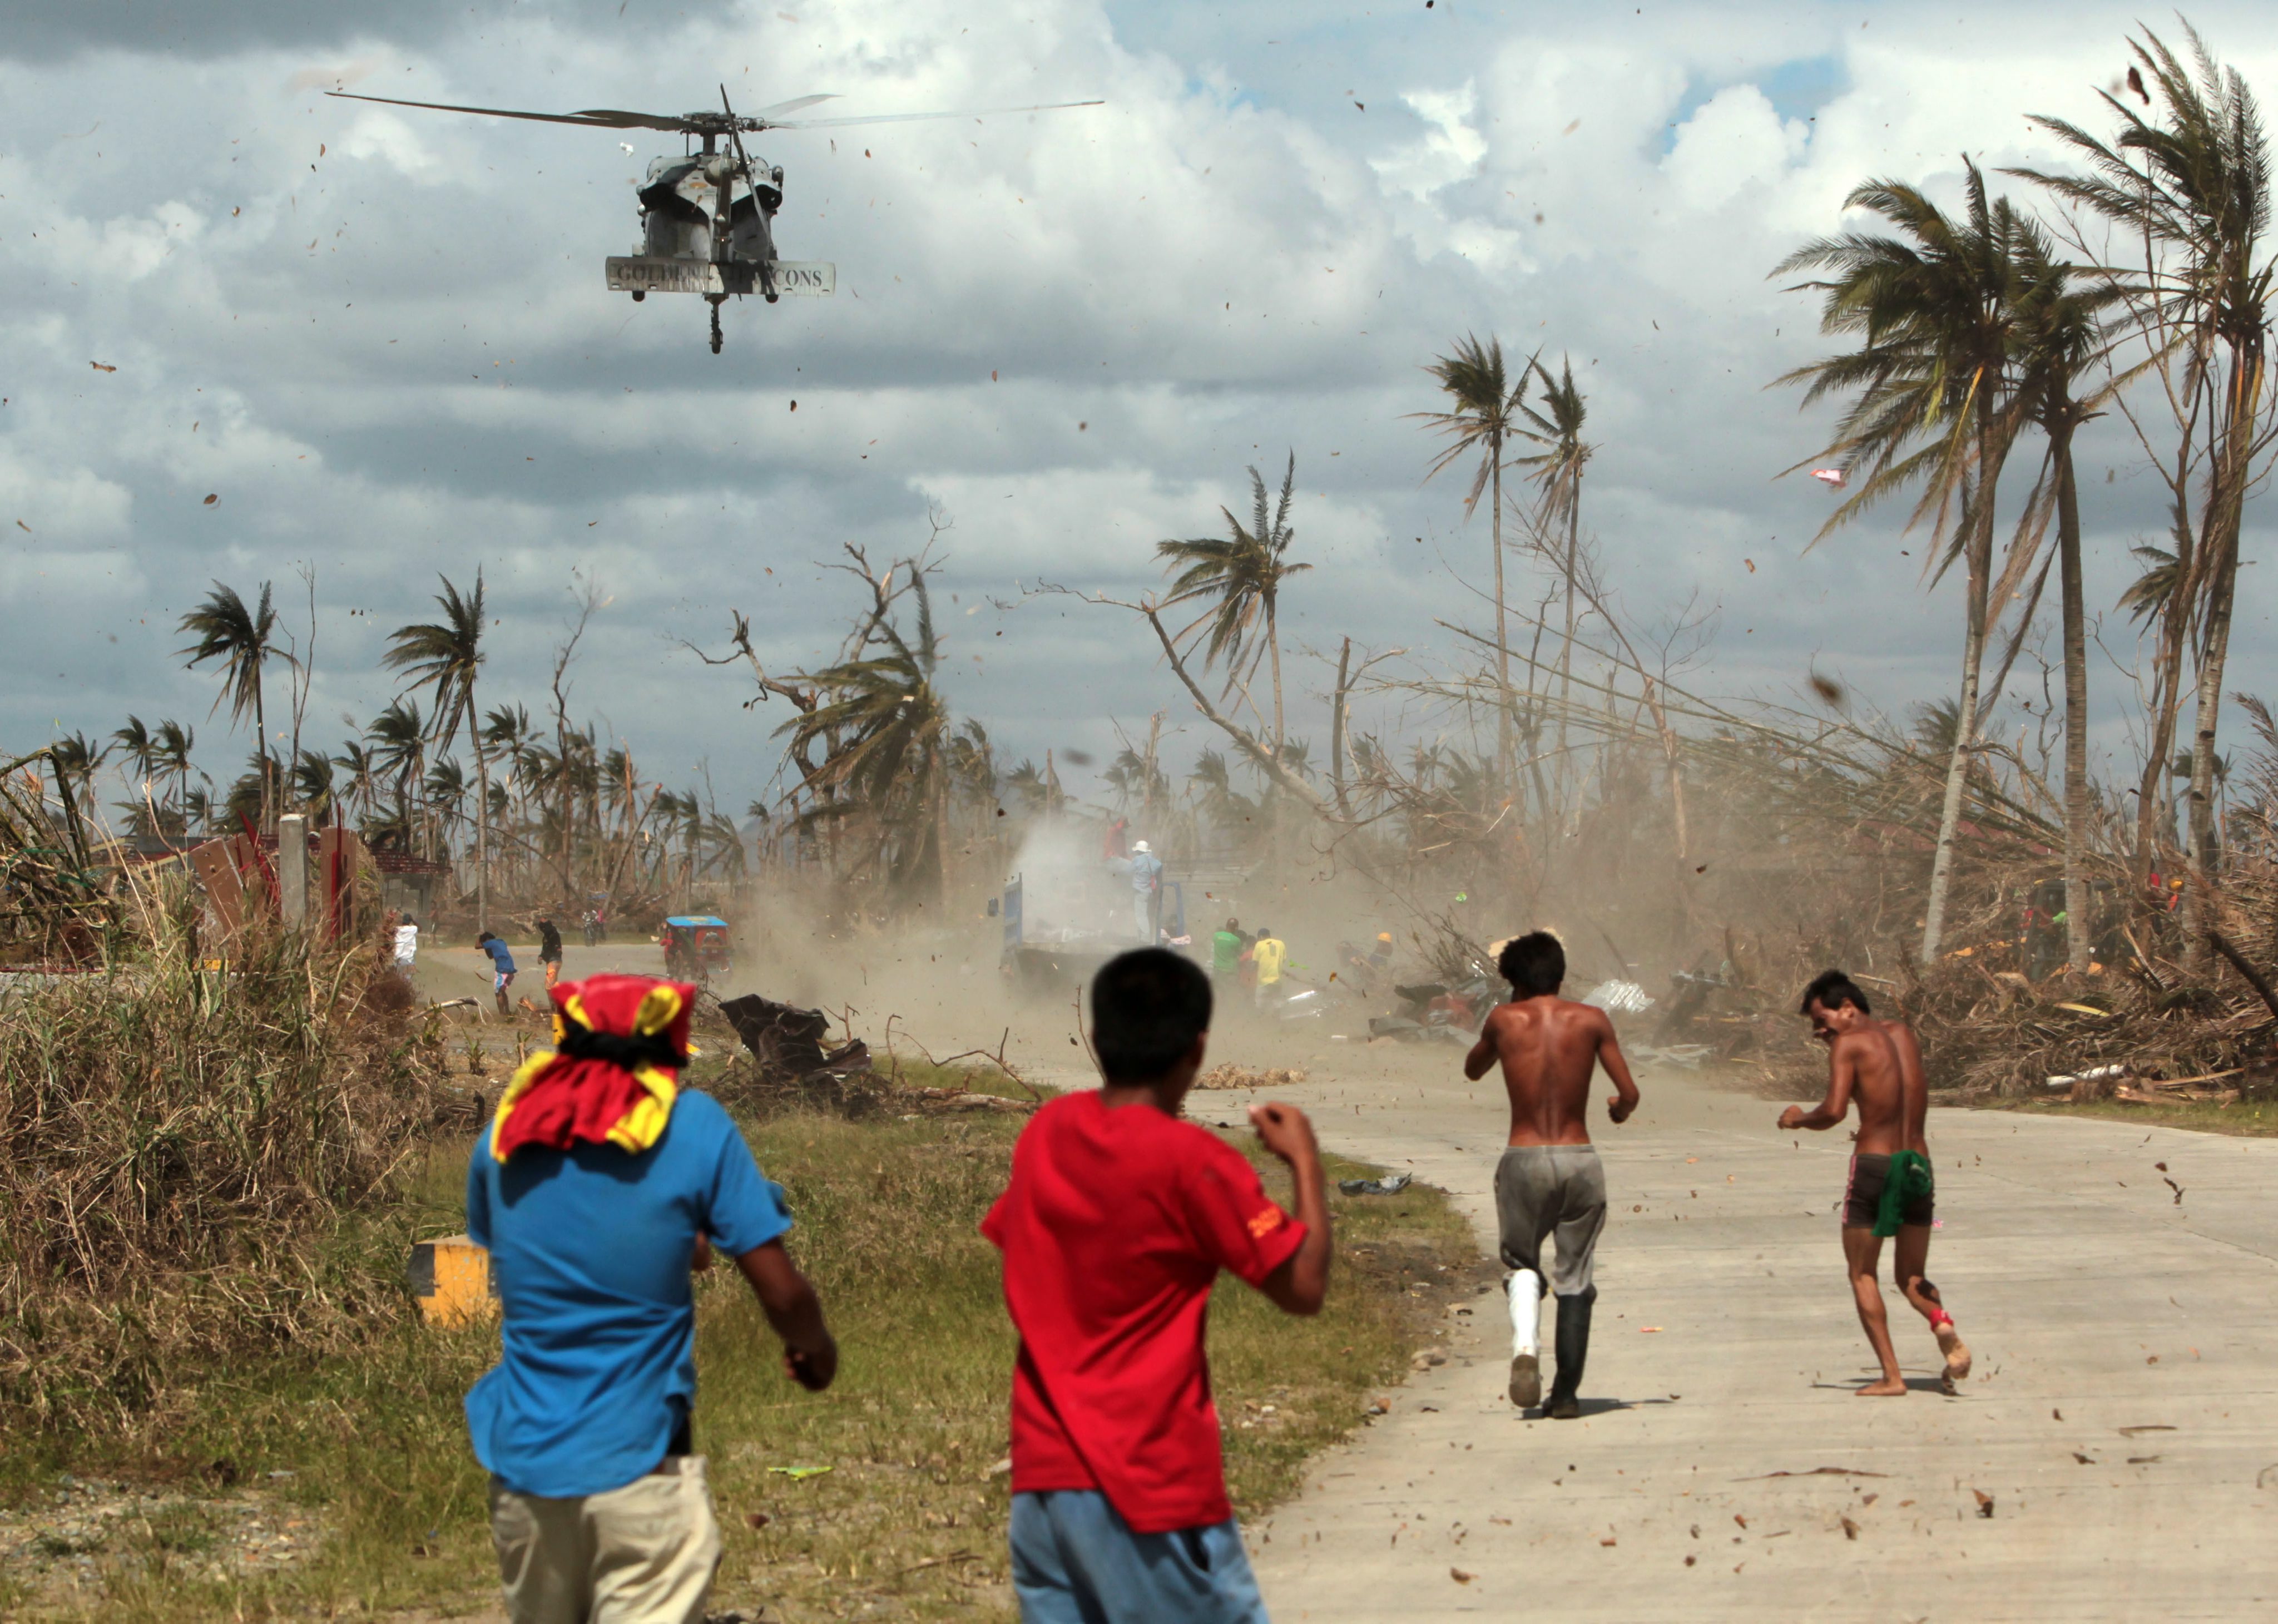 Filipino typhoon victims rush to get relief goods from a US Navy Sea Hawk helicopter in the typhoon devastated town of Palo, Leyte island province, Philippines. Photo: EPA